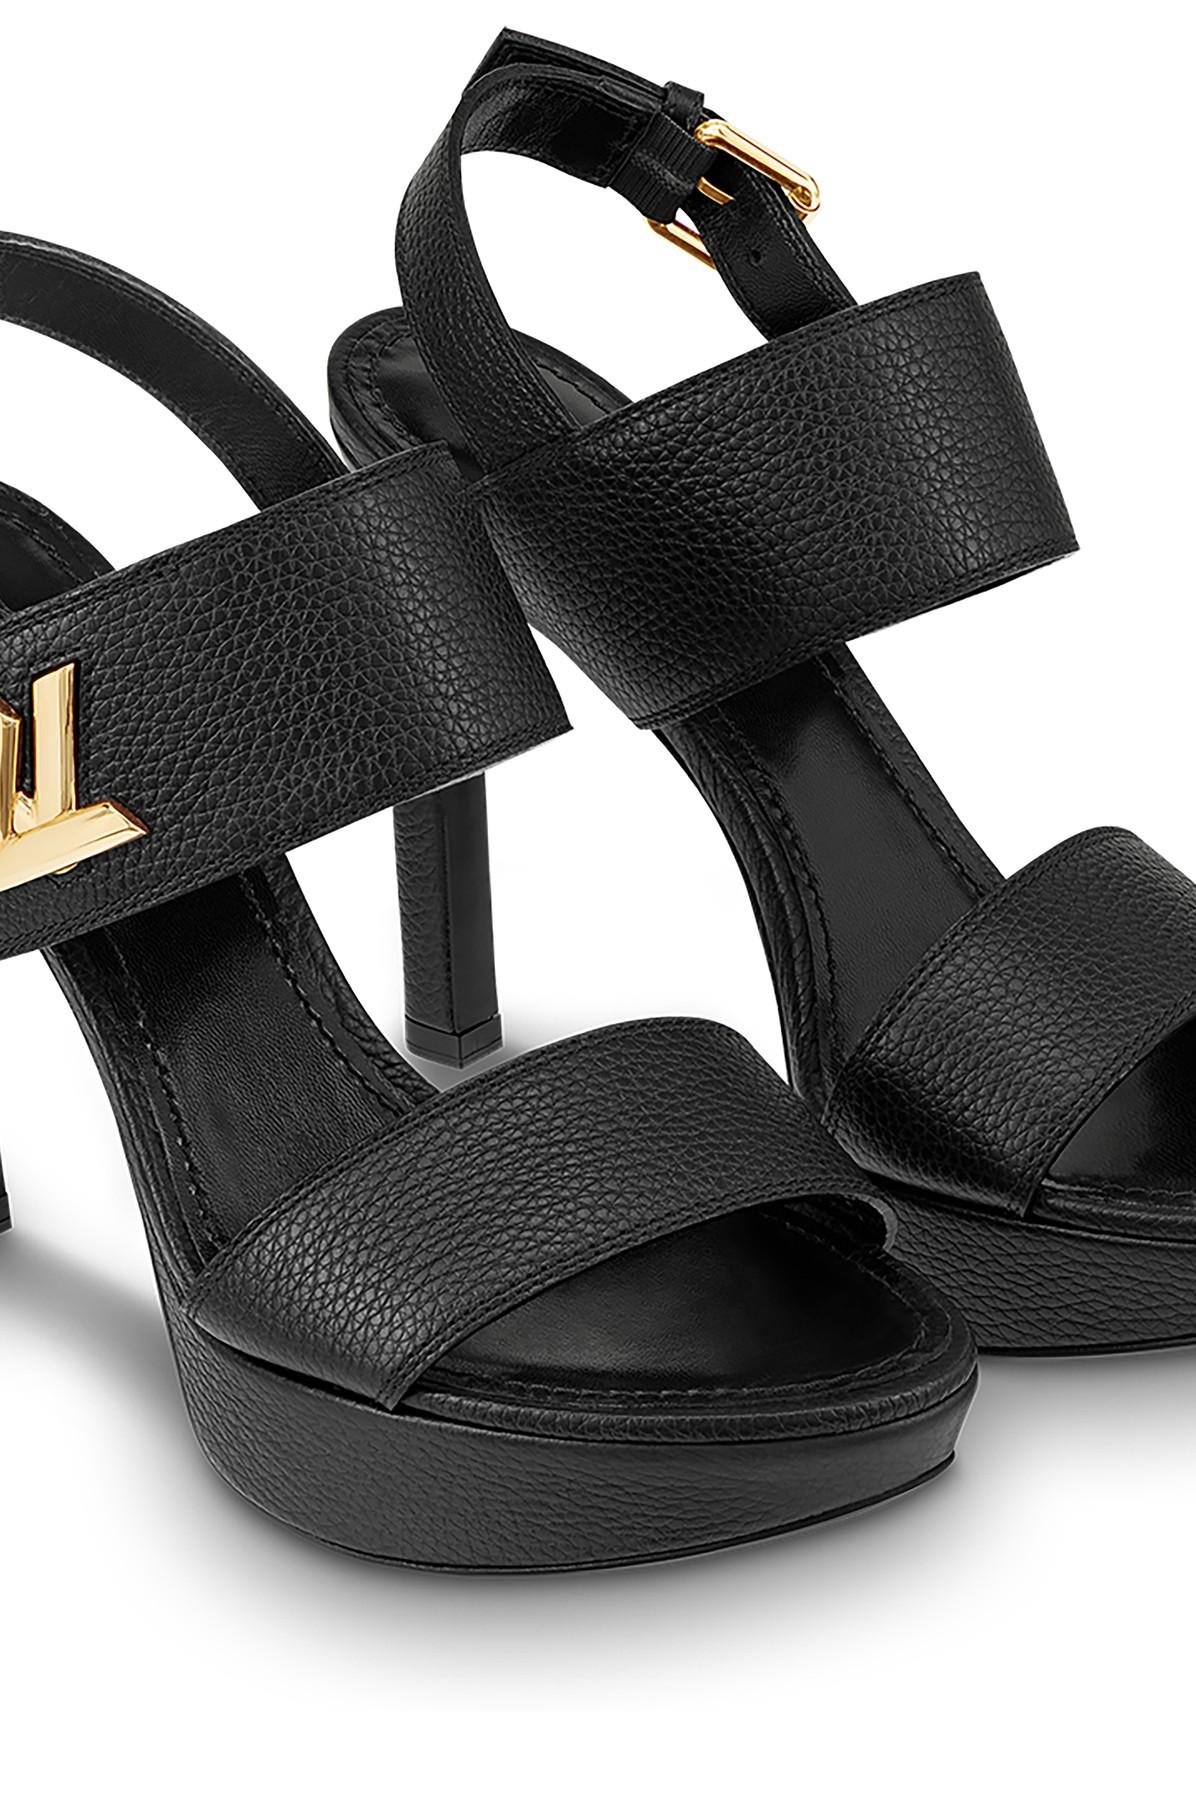 louis vuitton sandals price south africa